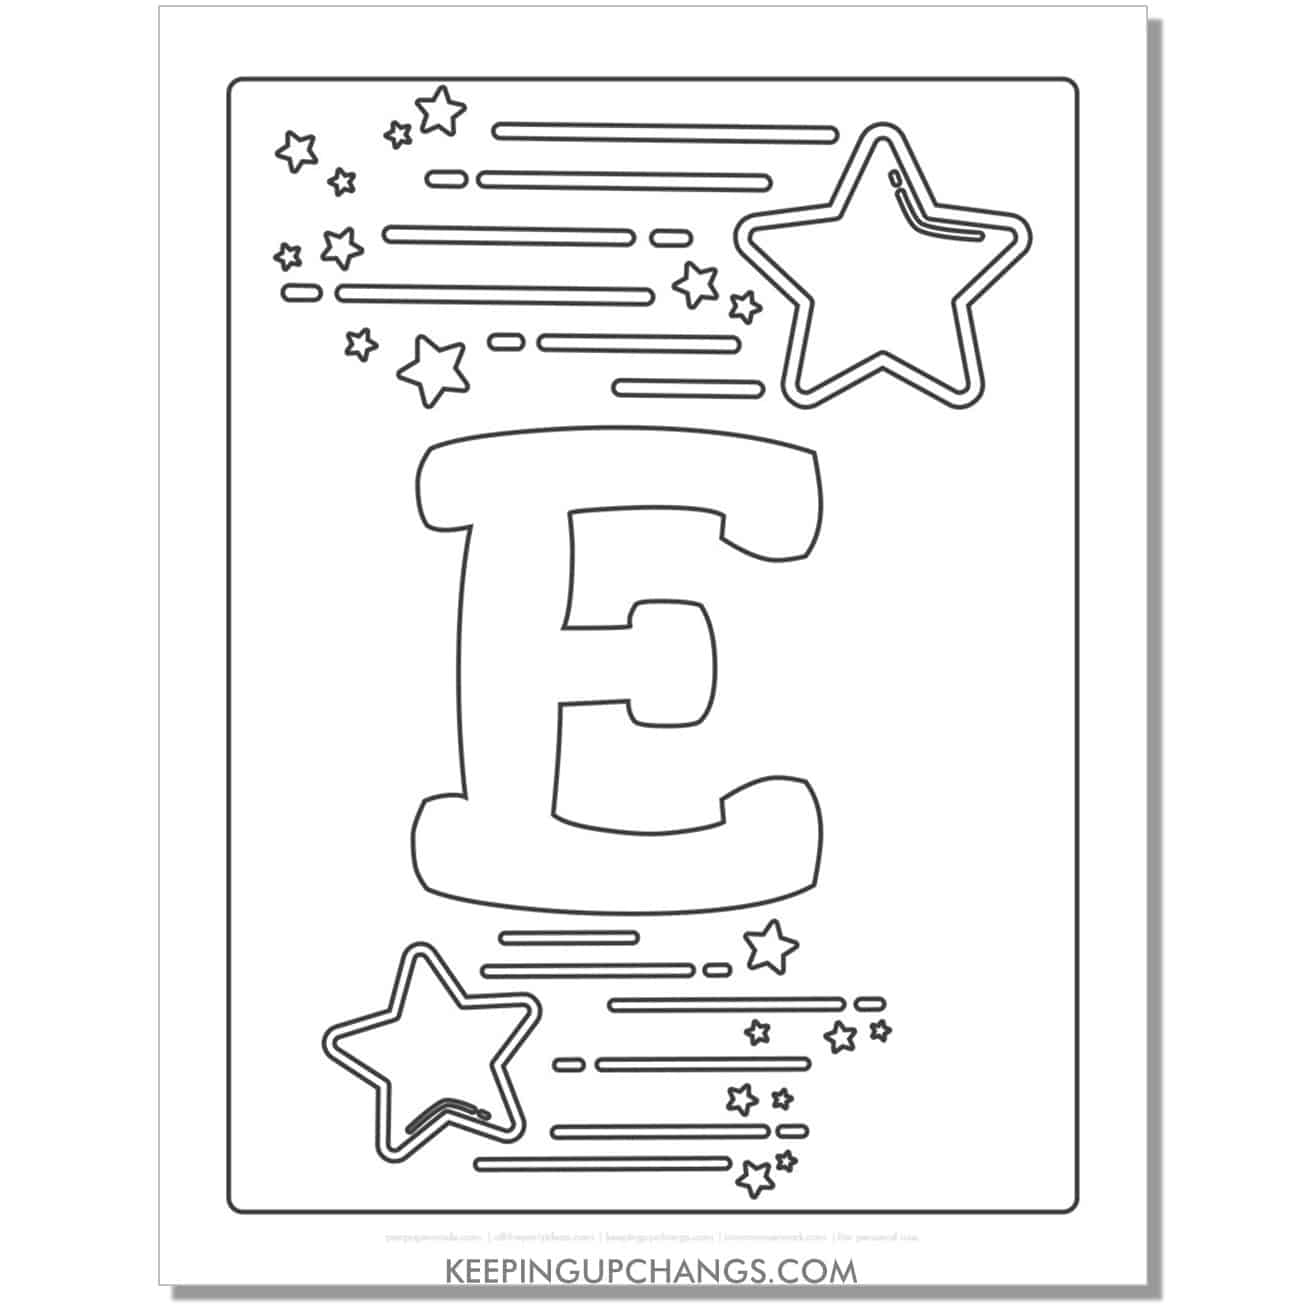 cool letter e to color with stars, space theme.